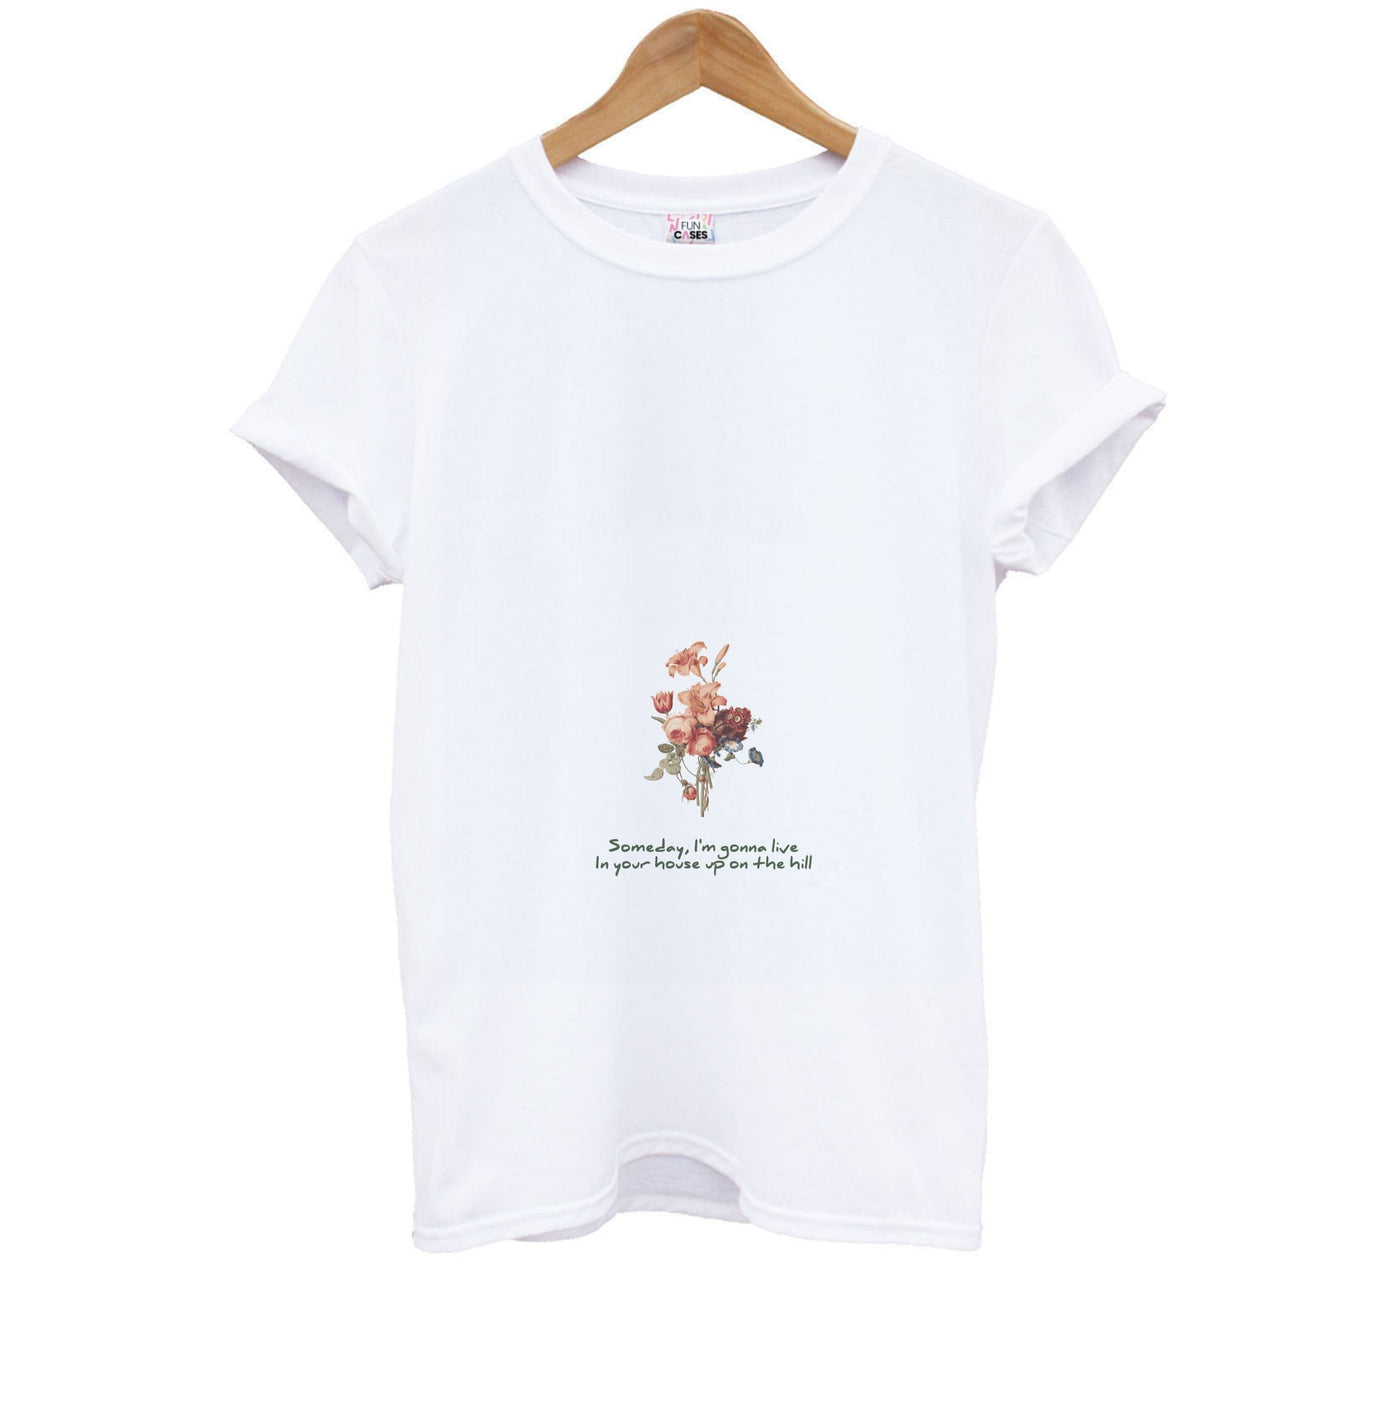 House Up On The Hill - Phoebe Bridgers Kids T-Shirt